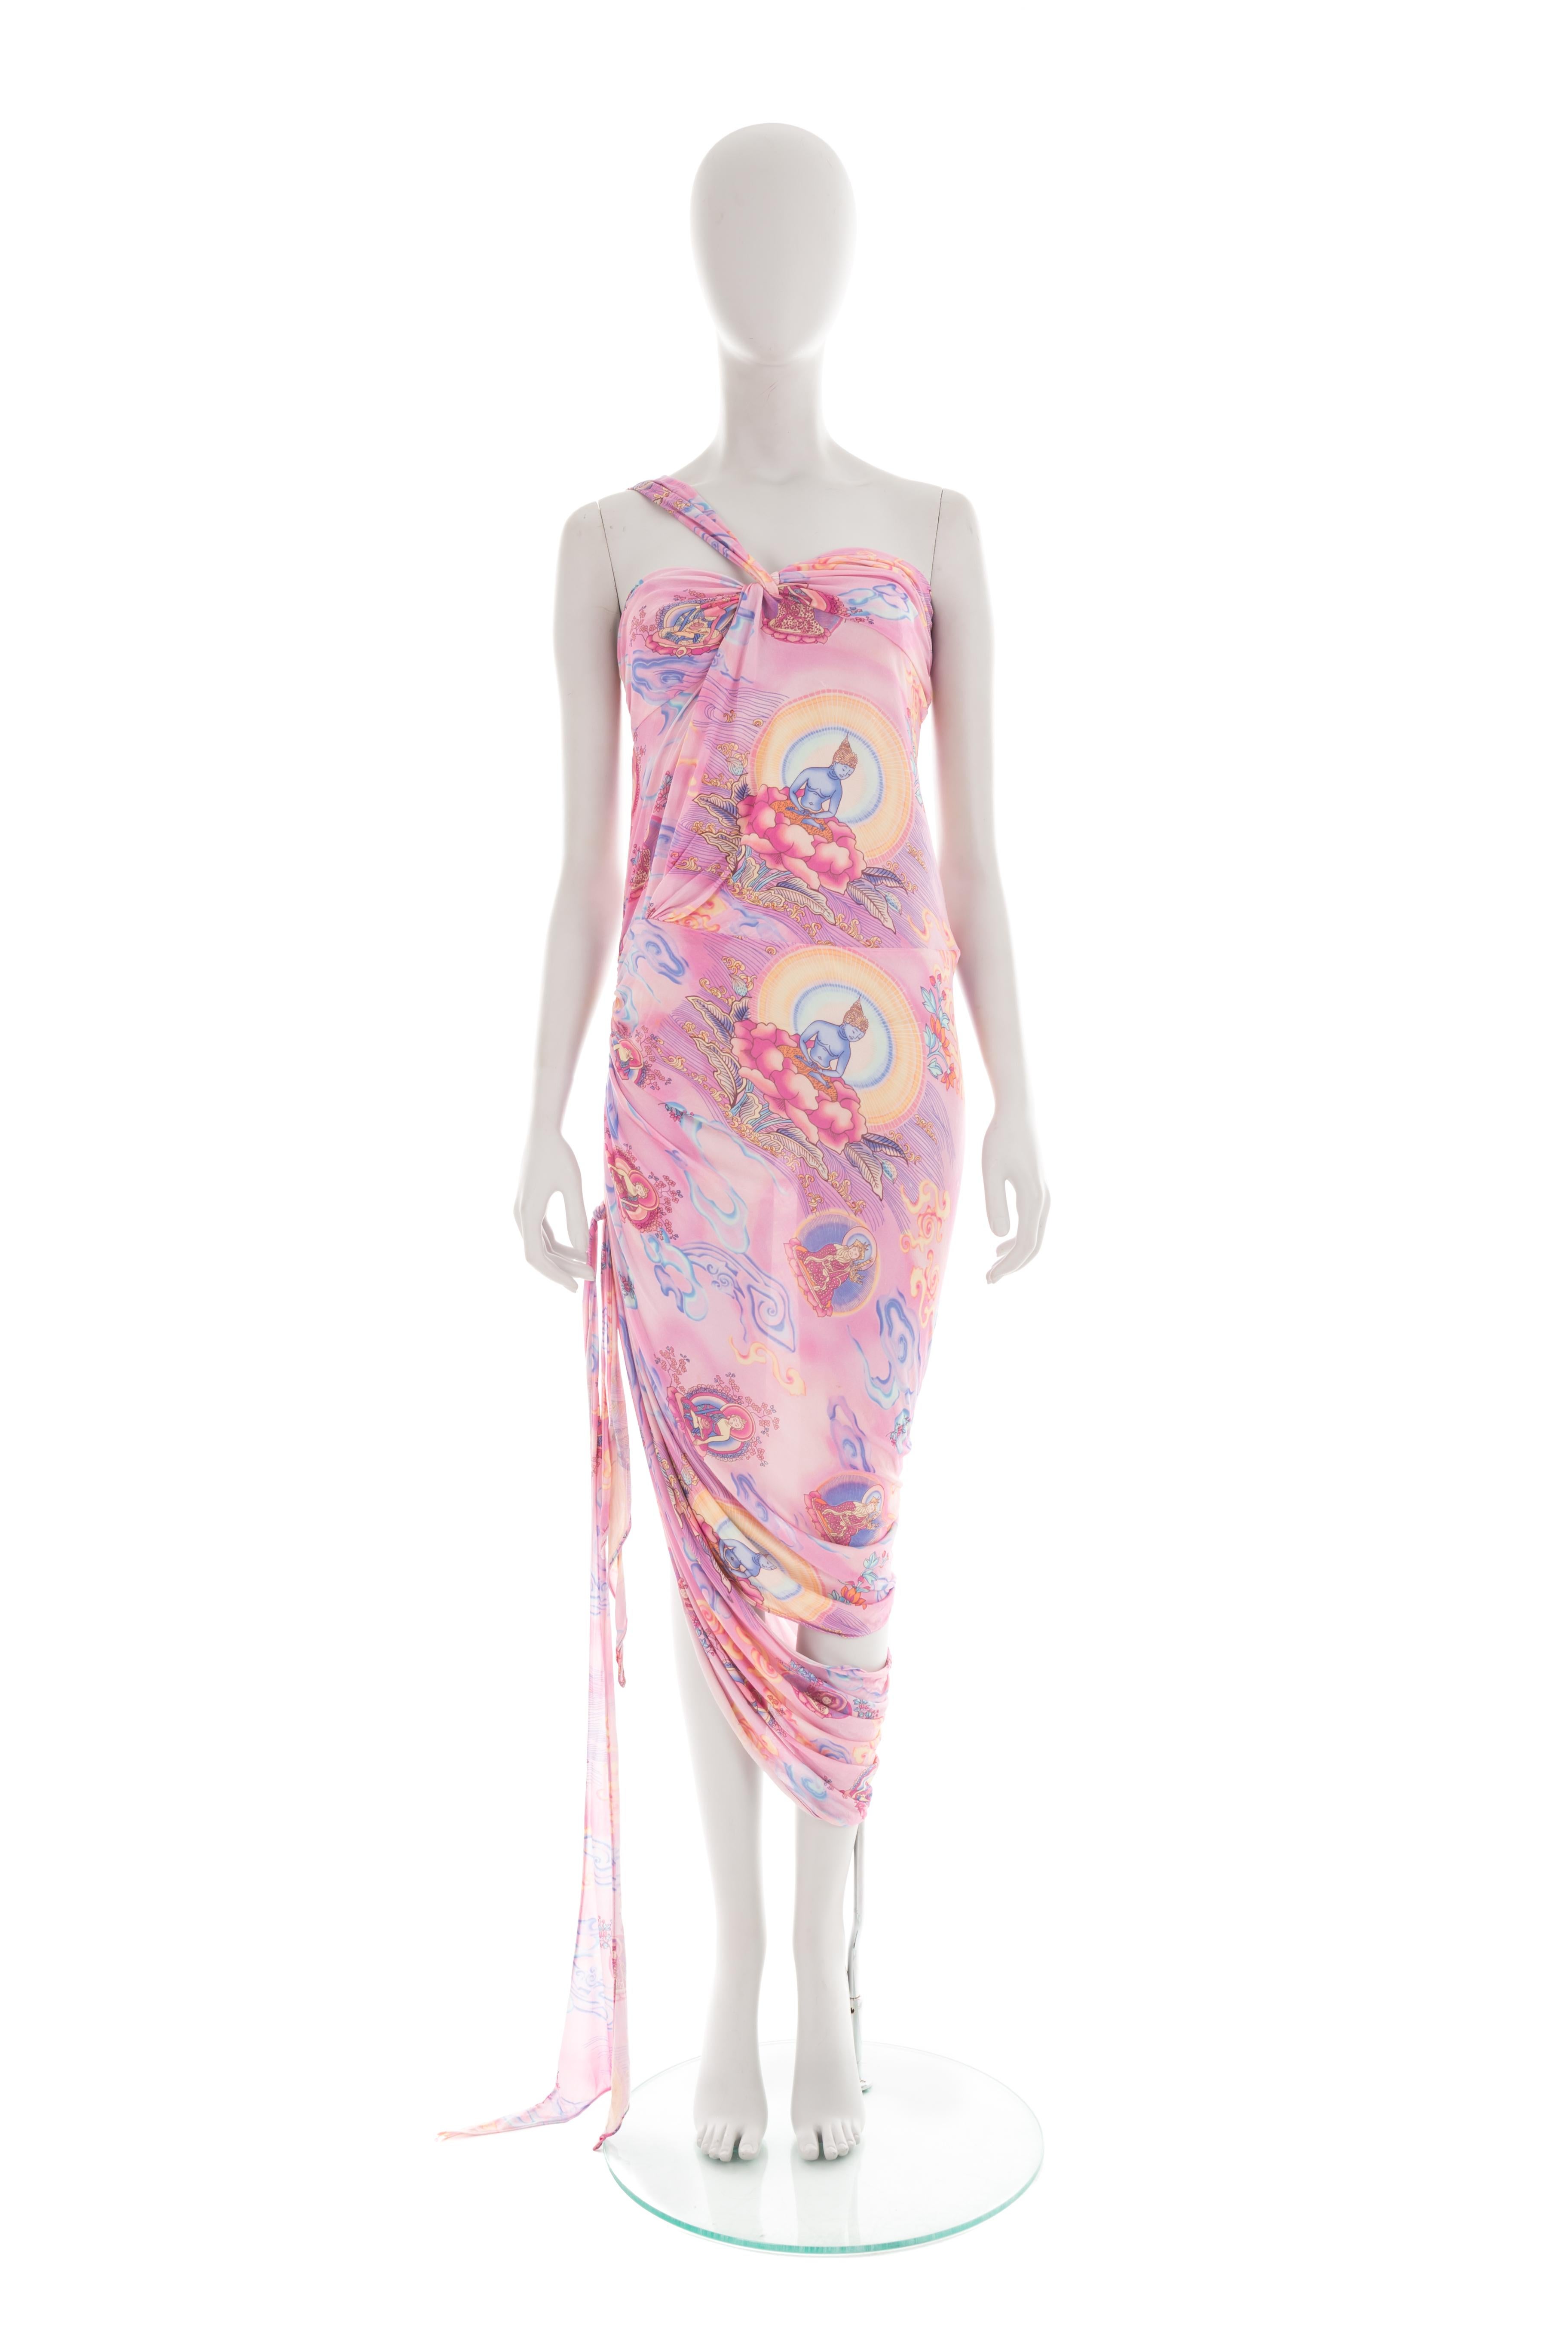 - Emanuel Ungaro by Giambattista Valli 
- Spring-summer 2004 collection
- Sold by Gold Palms Vintage
- Pink viscose draped dress
- “Shiva” print with blue, purple and yellow hues 
- One shoulder
- Side leg cut-out
- Knot detailing
- Side zipper
-